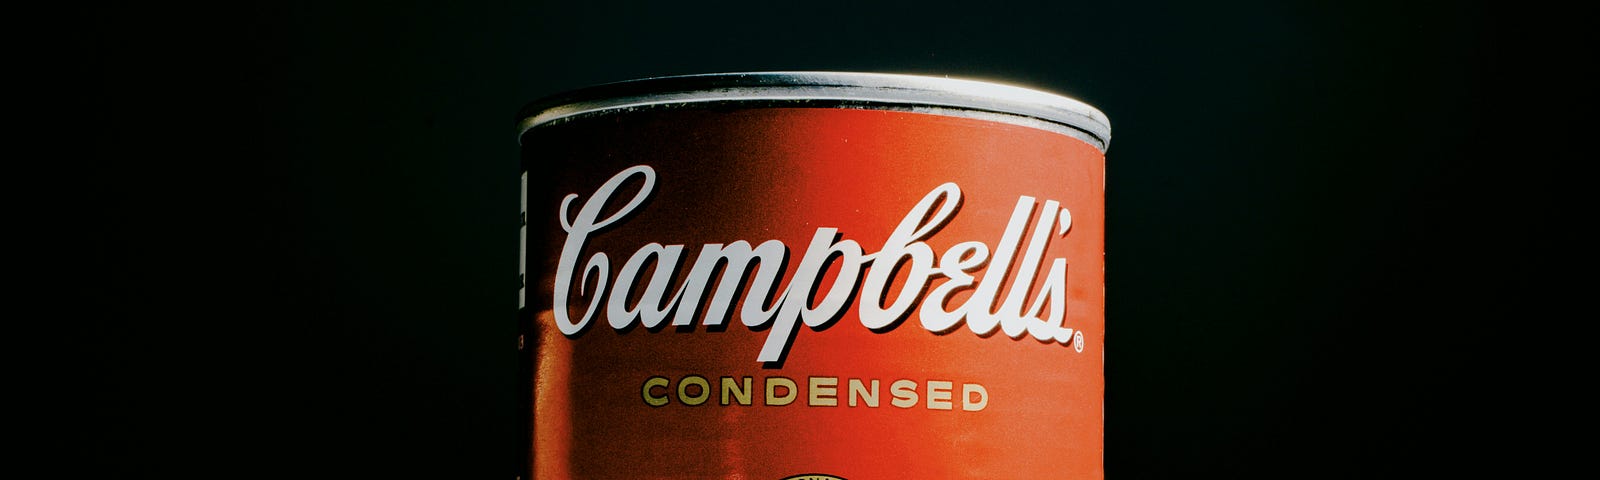 A campbell’s tomato soup can